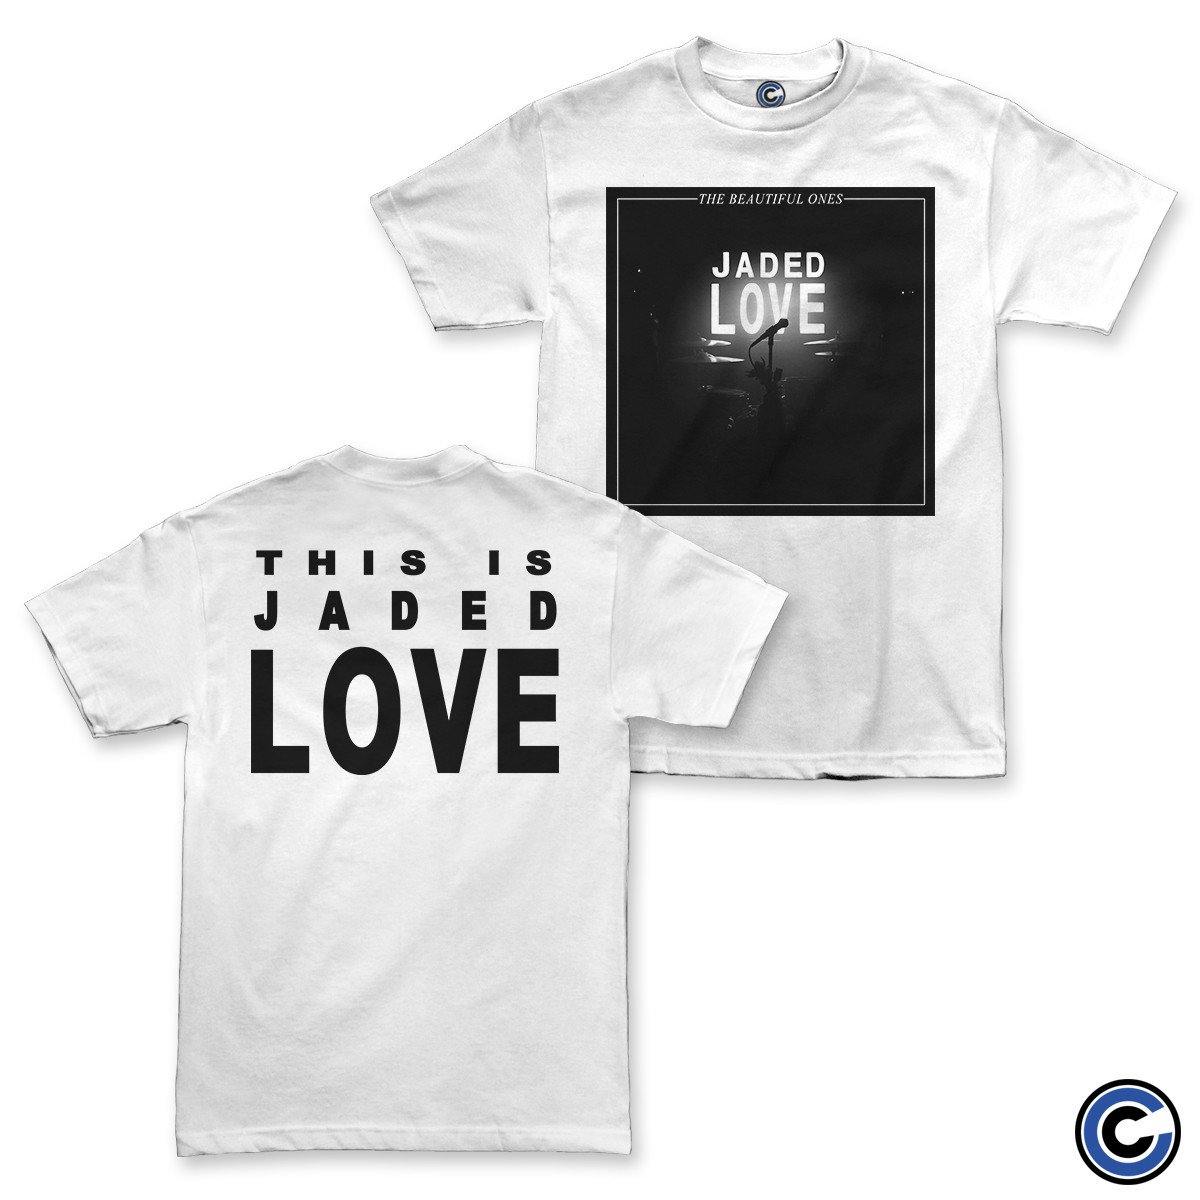 Buy – The Beautiful Ones "This Is Jaded Love" Shirt – Band & Music Merch – Cold Cuts Merch